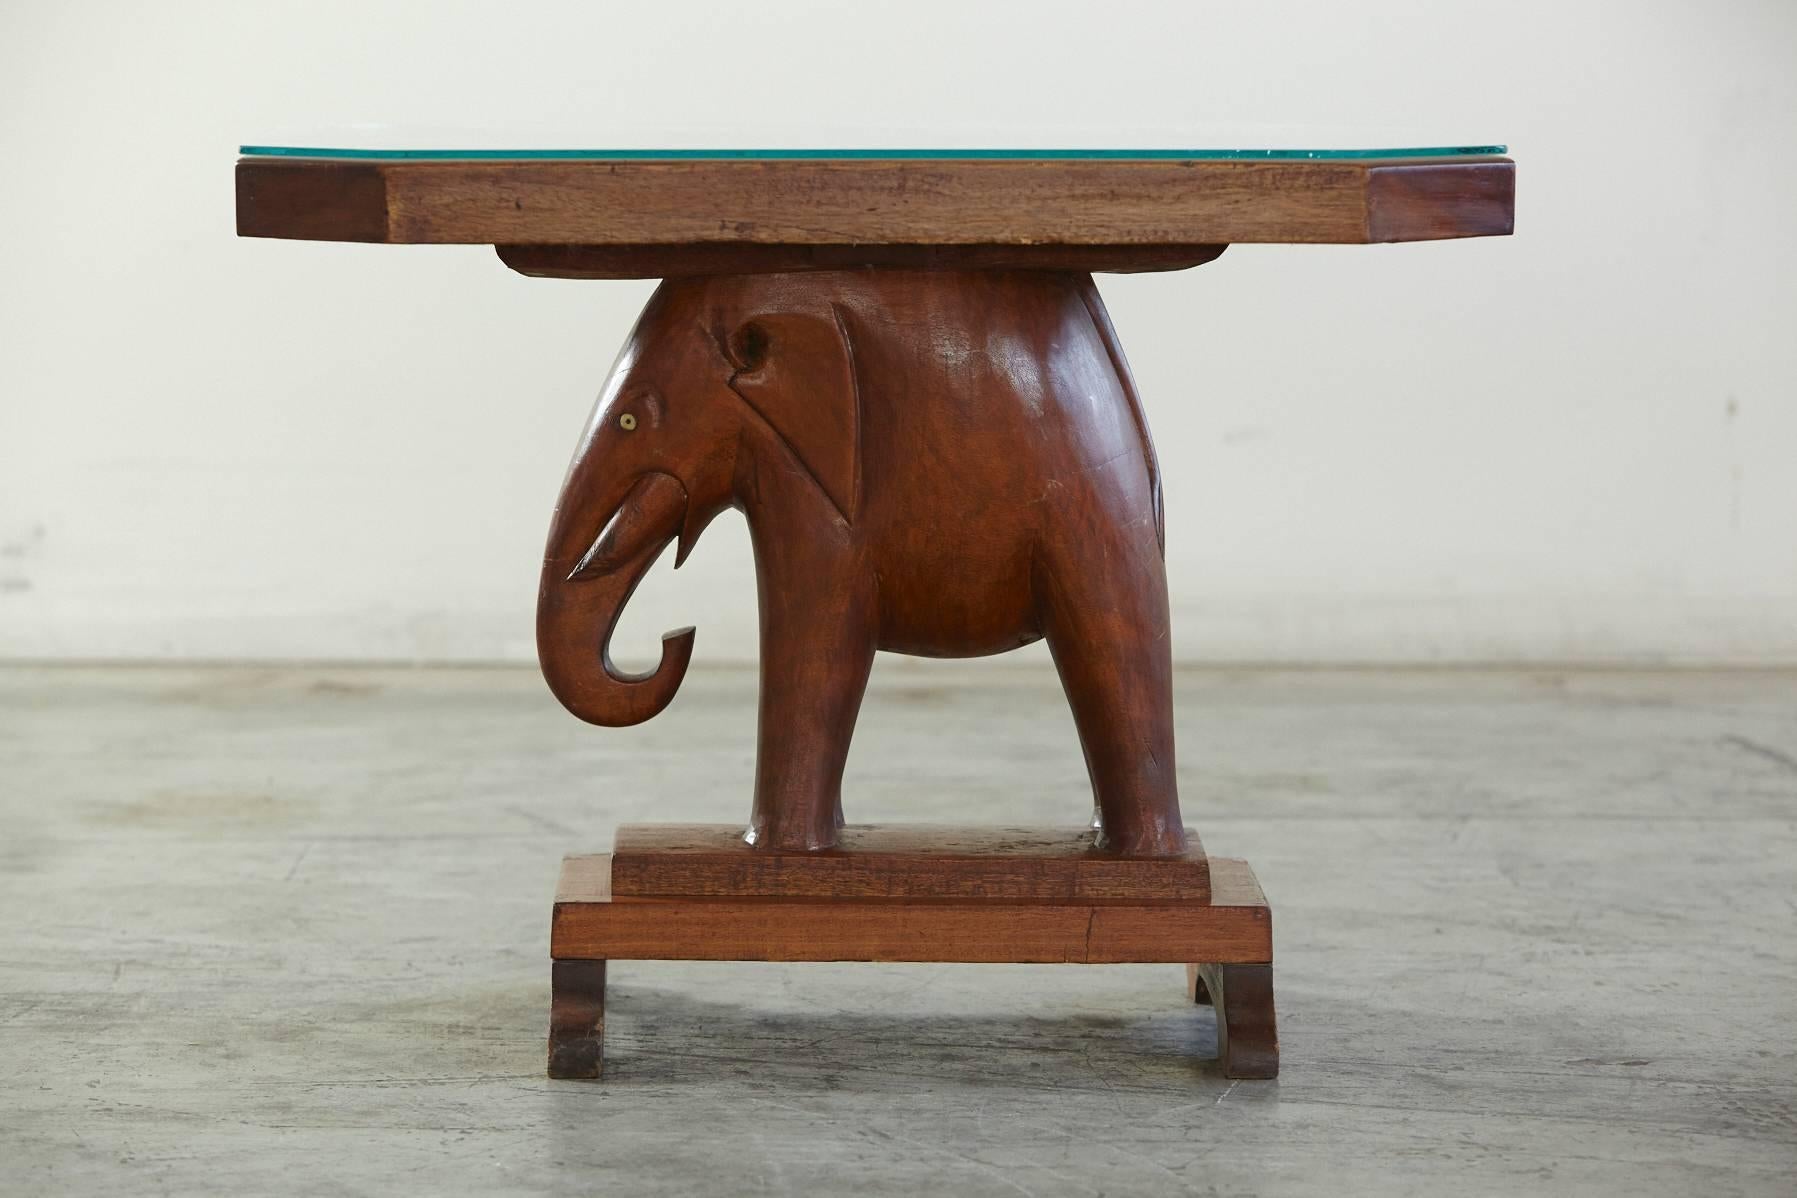 Octagonal mahogany end table with a carved elephant figurine base, with eyes made of bone, Nigeria circa 1940s. 

A similar, oval table was given to Mrs Roosevelt and presents almost the identical base and carvings, as the one which was owned by